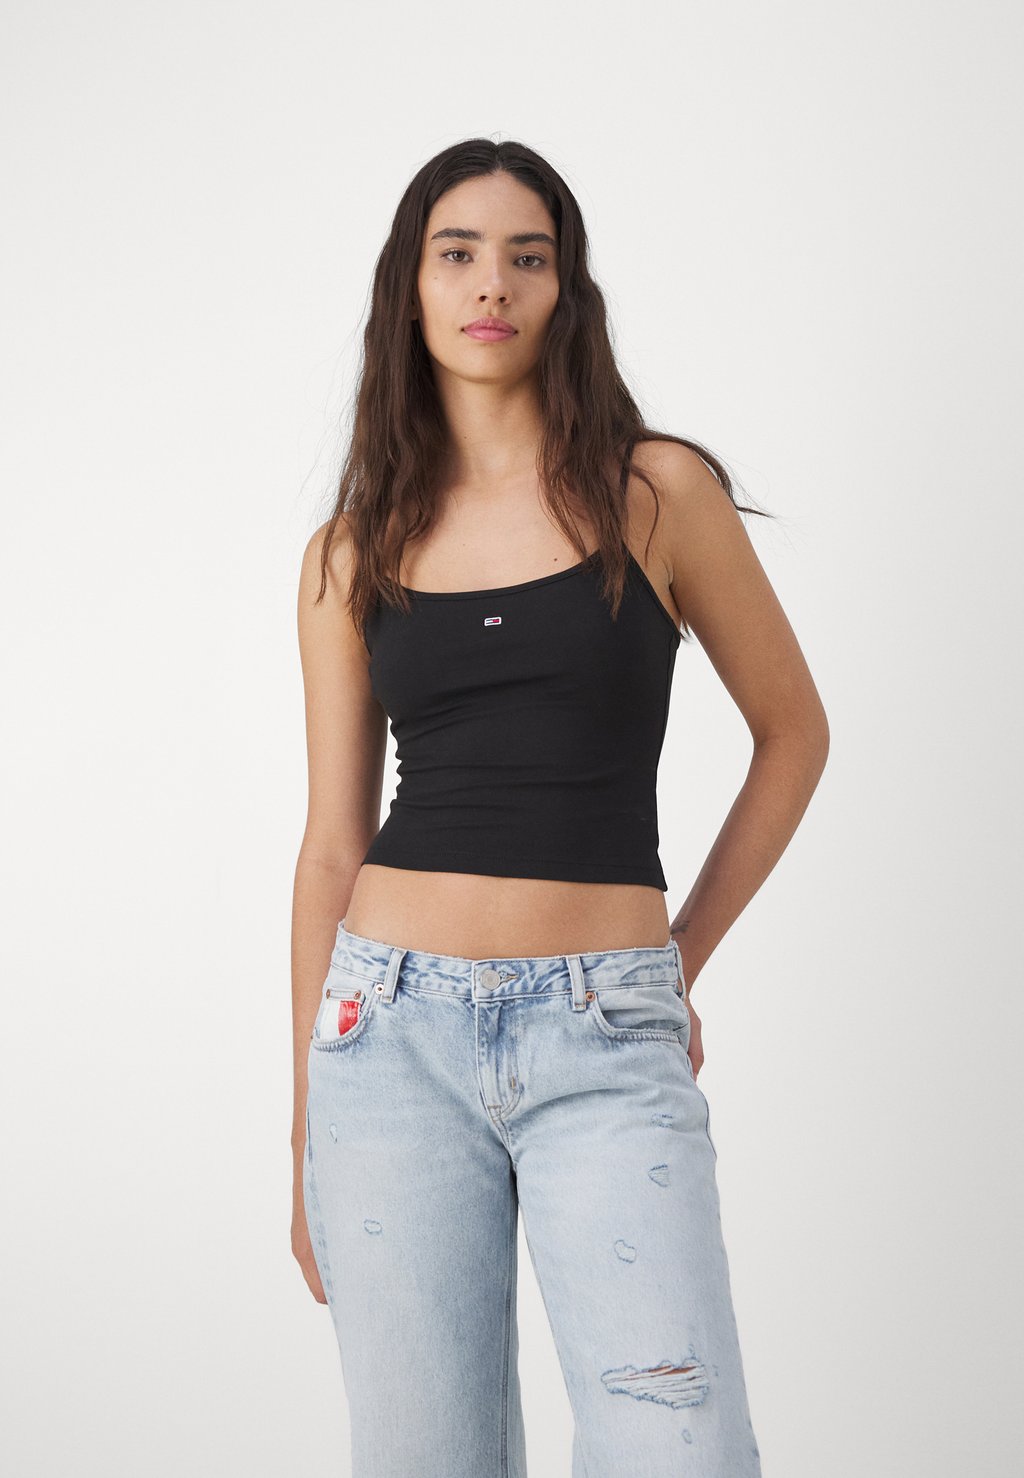 Топ Essential Strap Top Tommy Jeans, черный топ badge strap tommy jeans черный